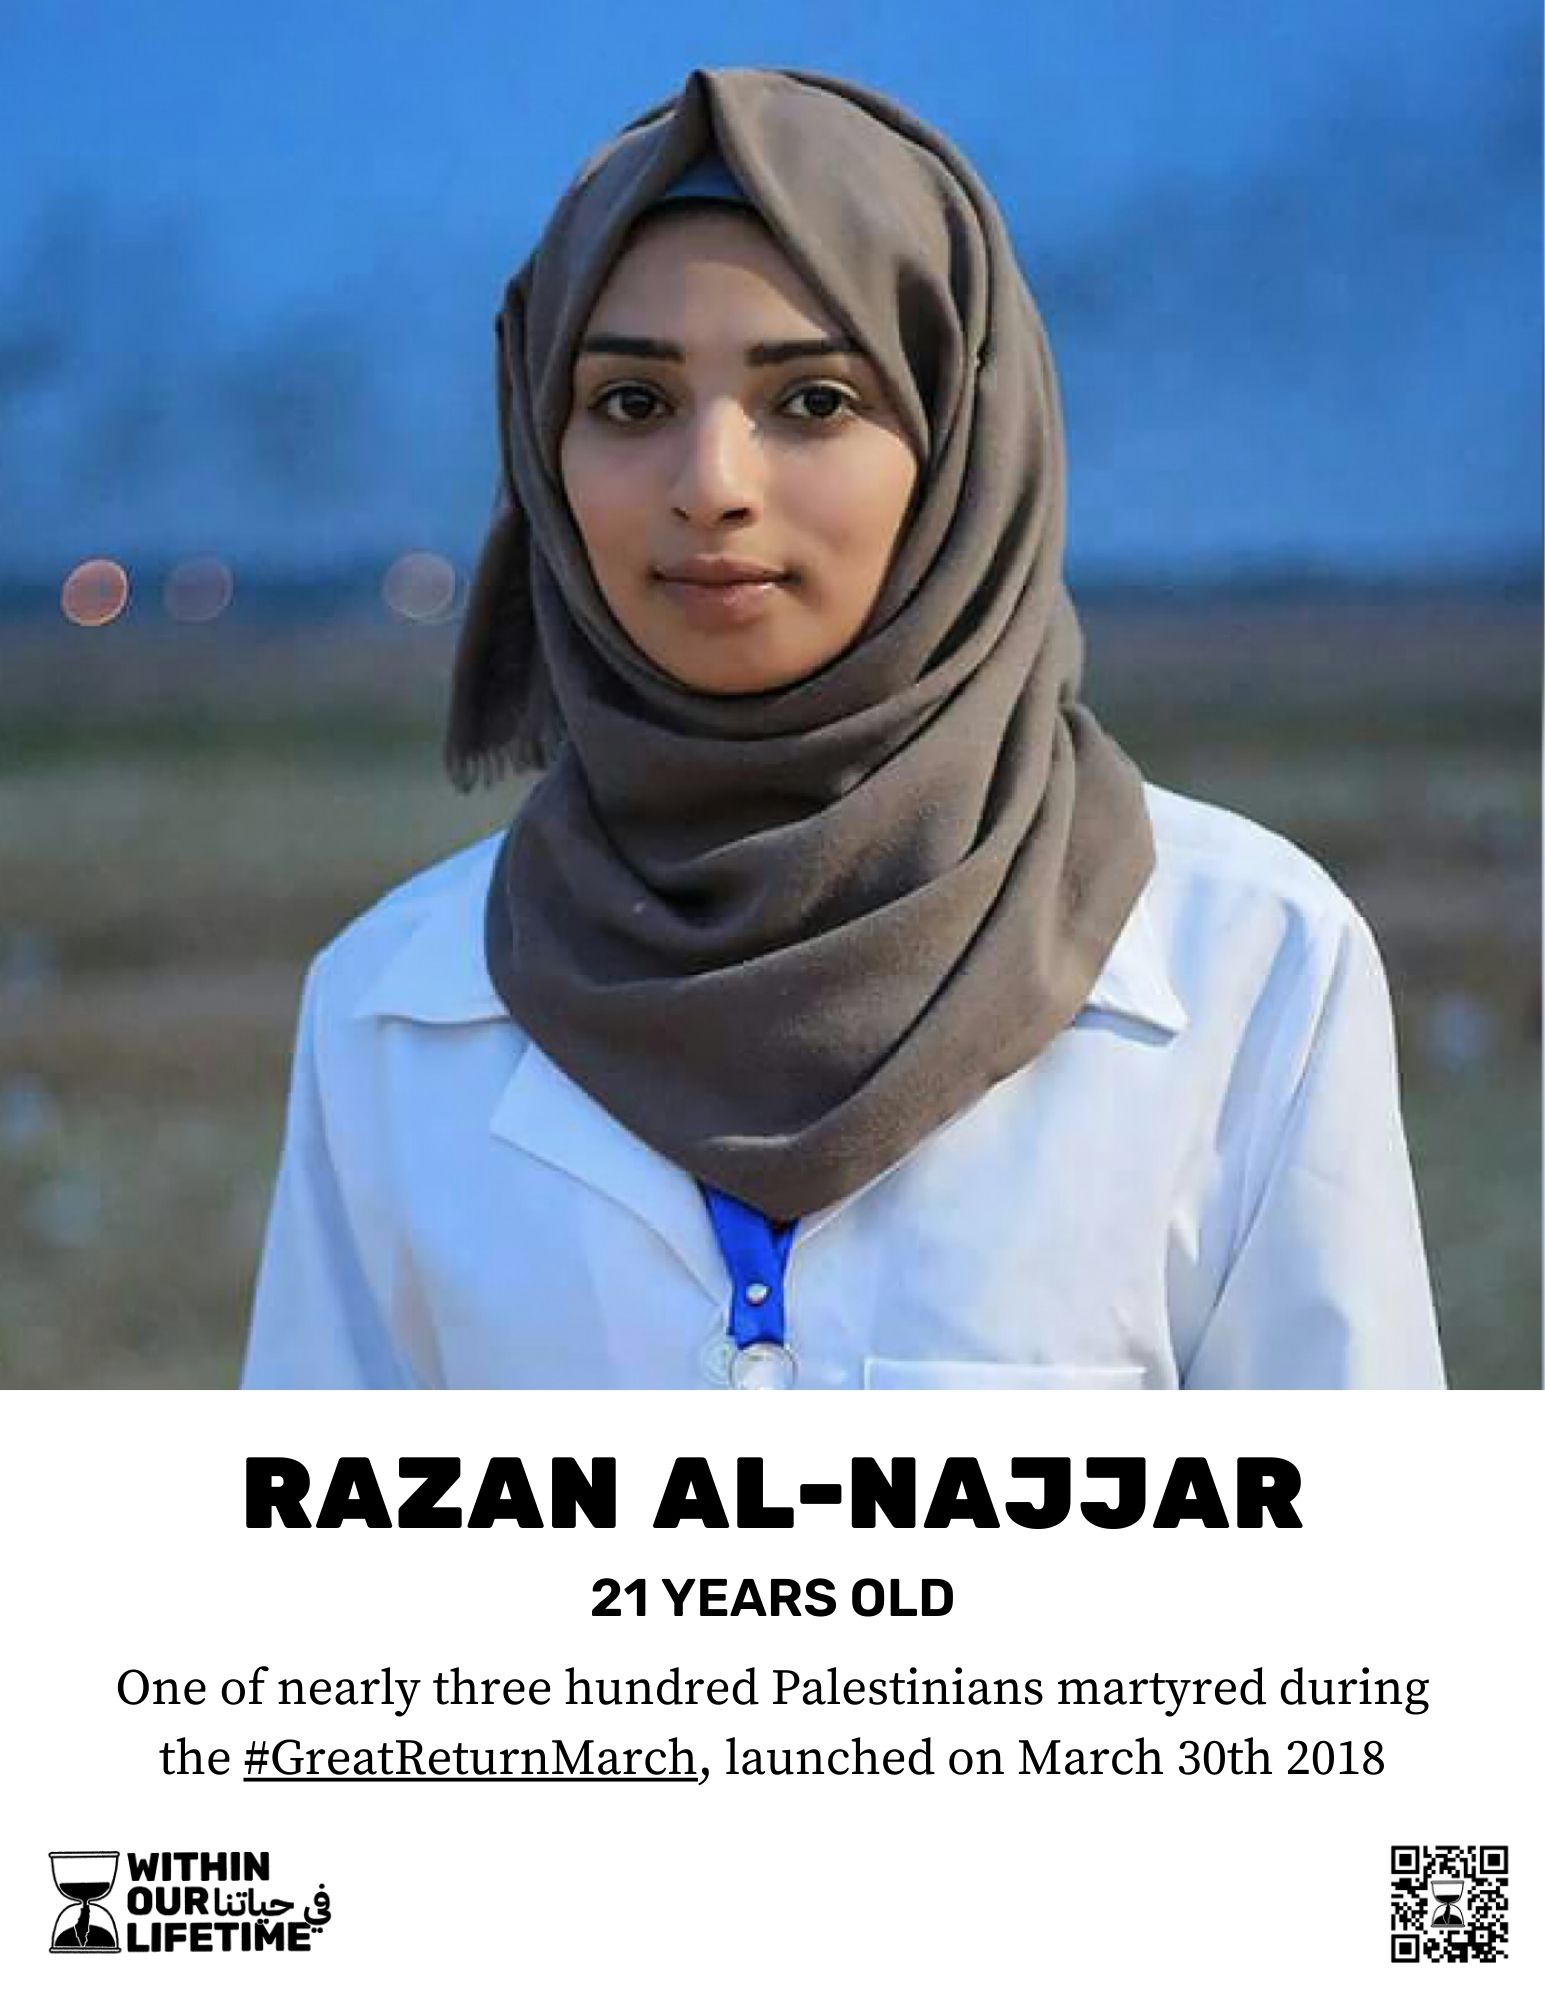 Razan Al-Najjar, 21 years old. One of nearly three hundred Palestinians martyred during the #GreatReturnMarch, launched on March 30th 2018.